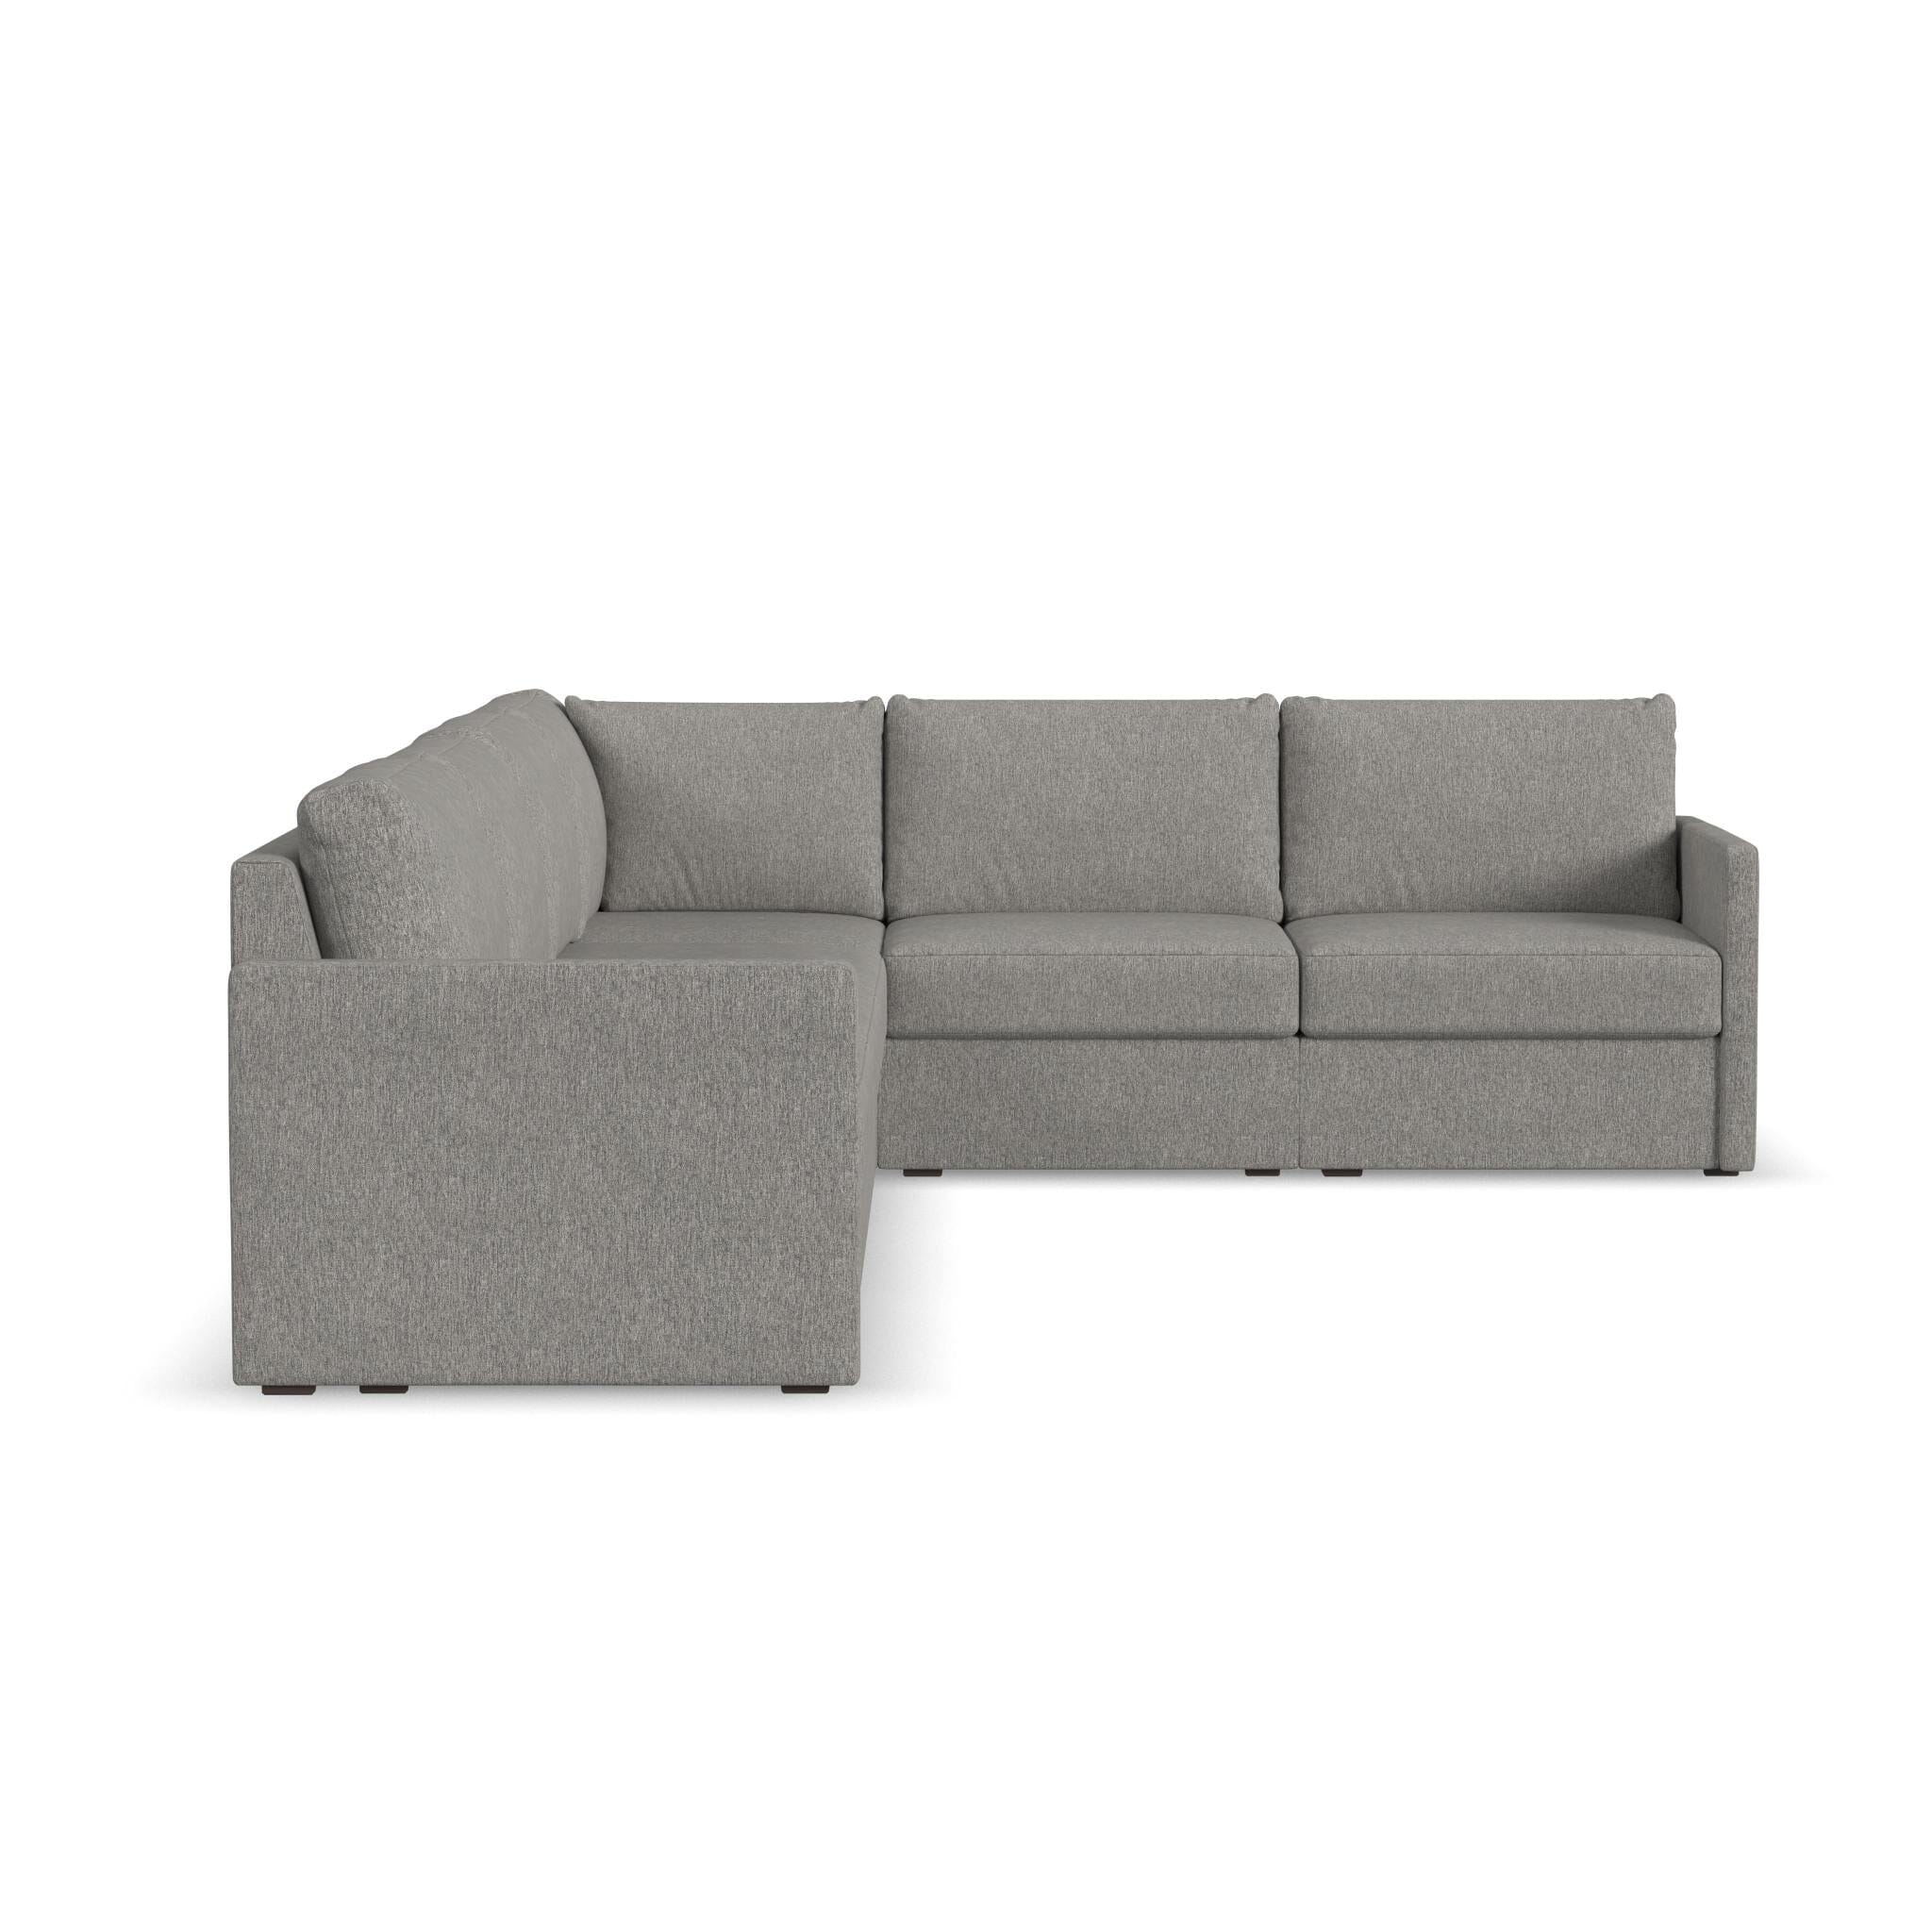 Traditional 6-Seat Sectional with Narrow Arm By Flex Sectional Flex